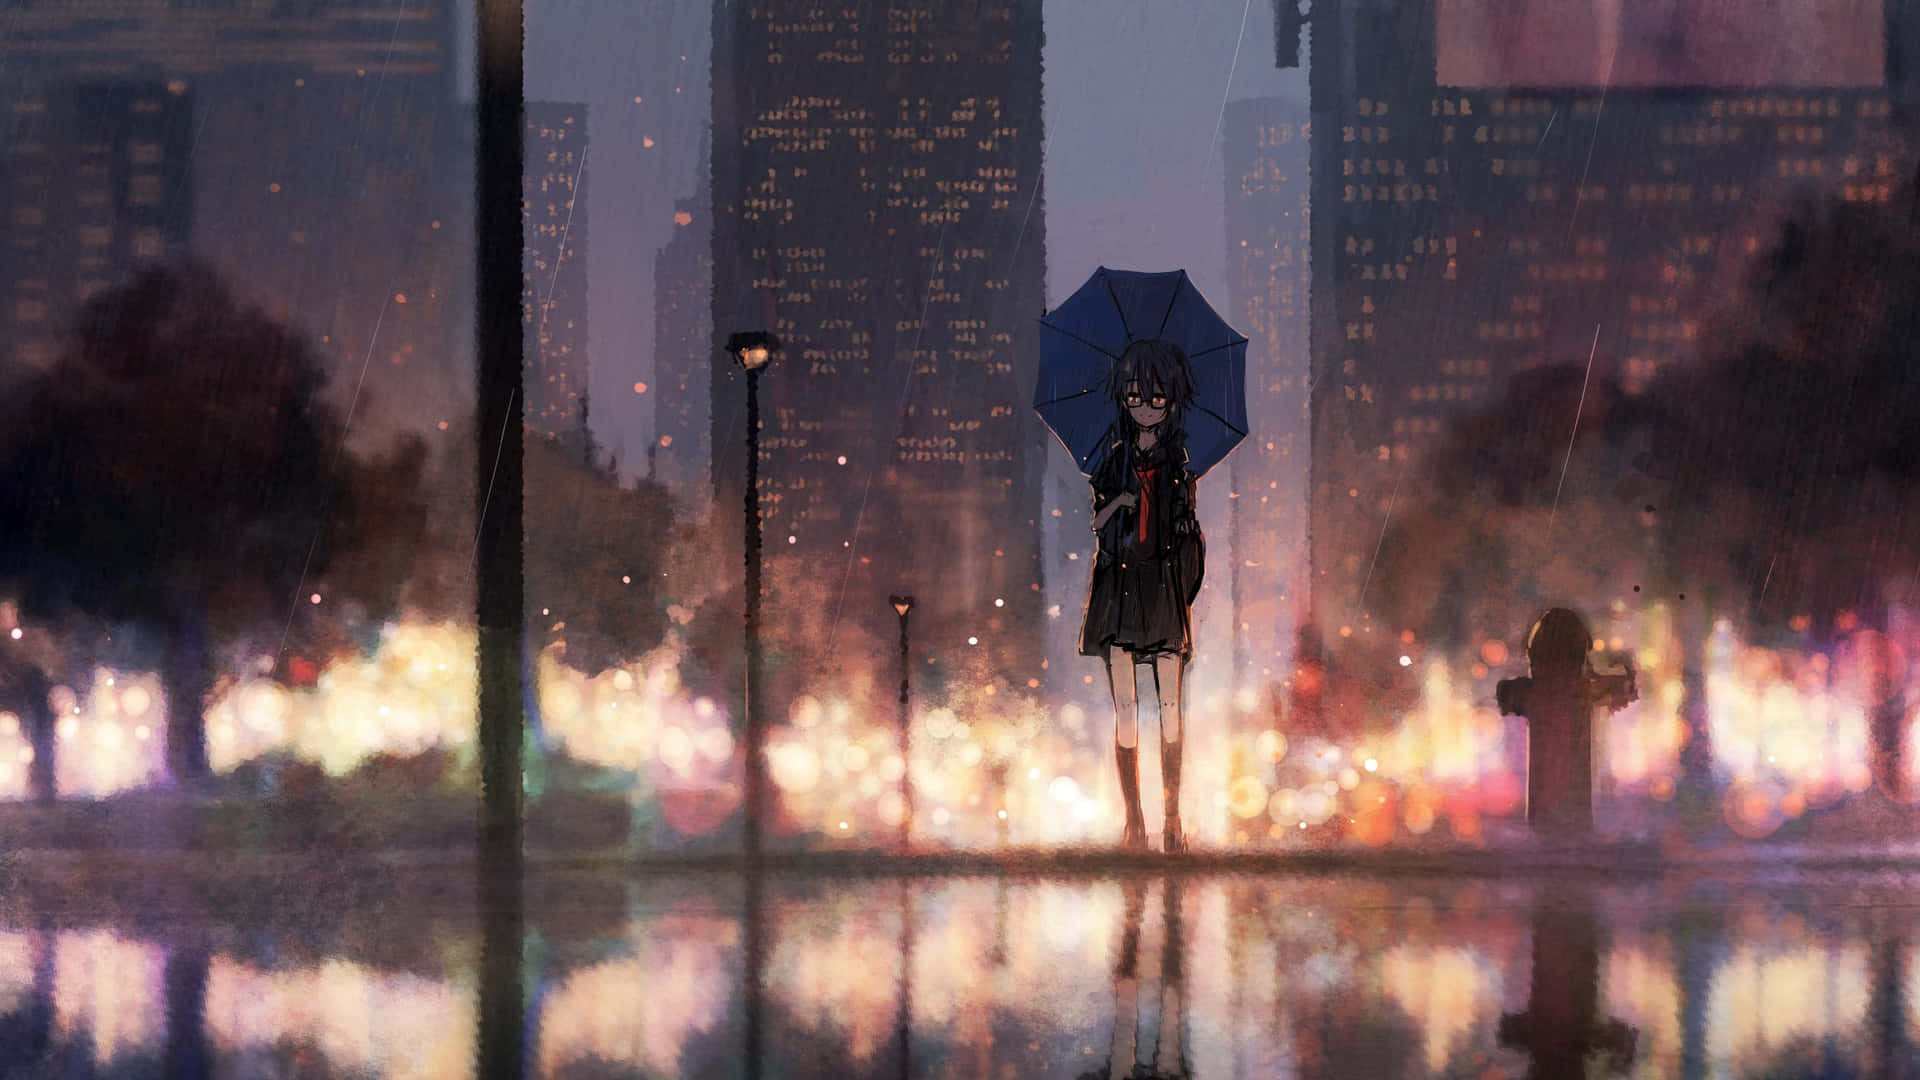 Anime Girl With Umbrella During Rainy Day Picture